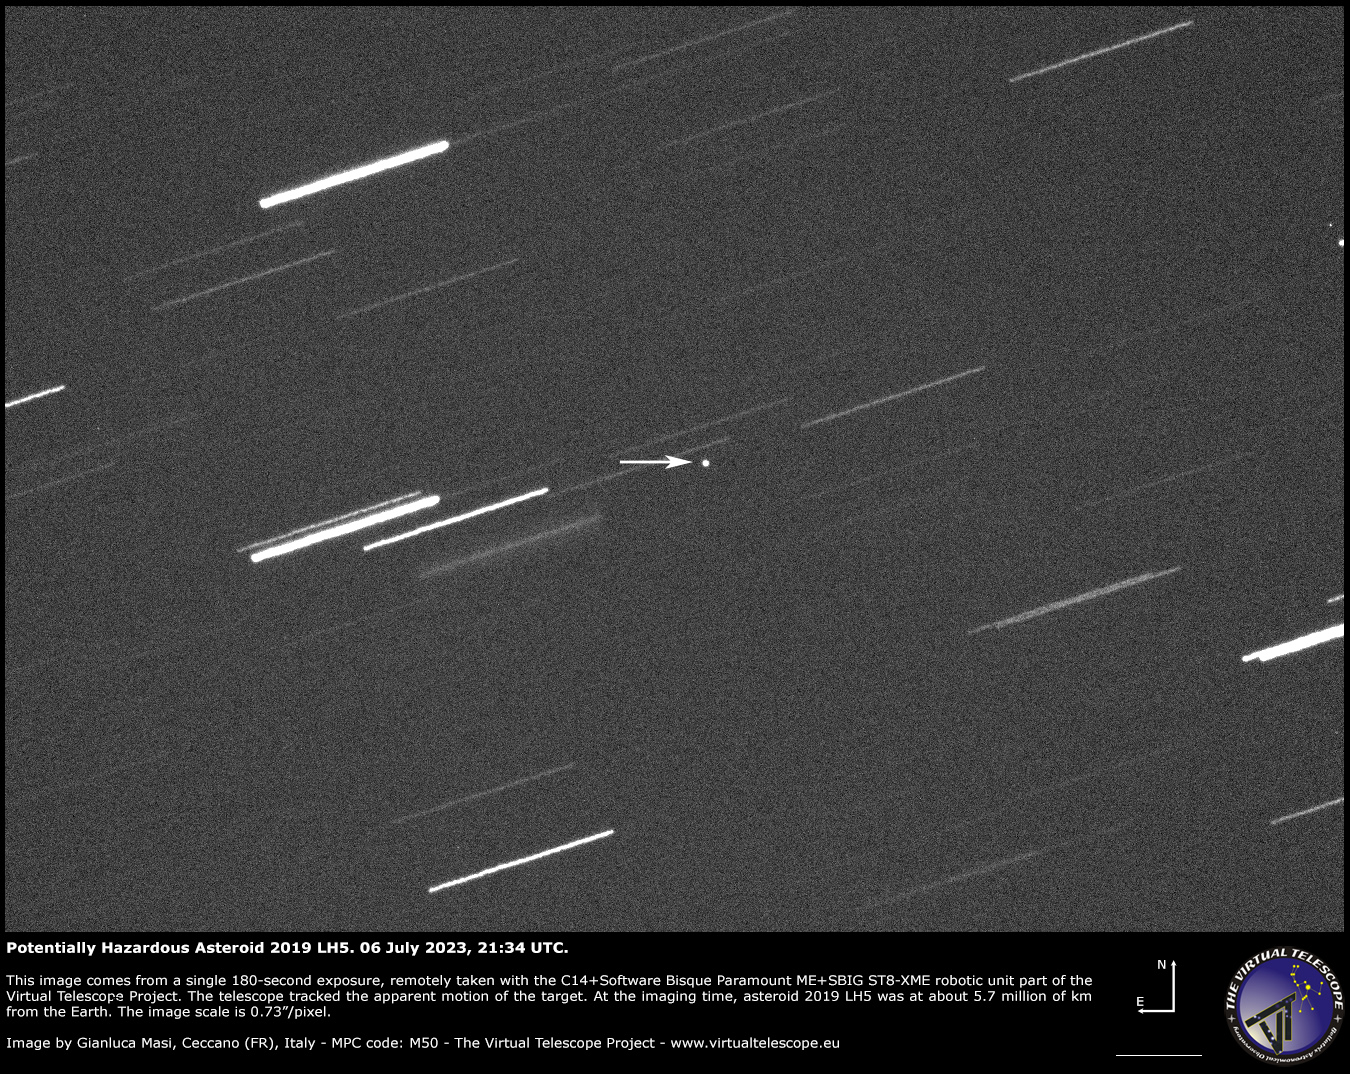 Potentially Hazardous Asteroid 2019 LH5: a image - 6 July 2023